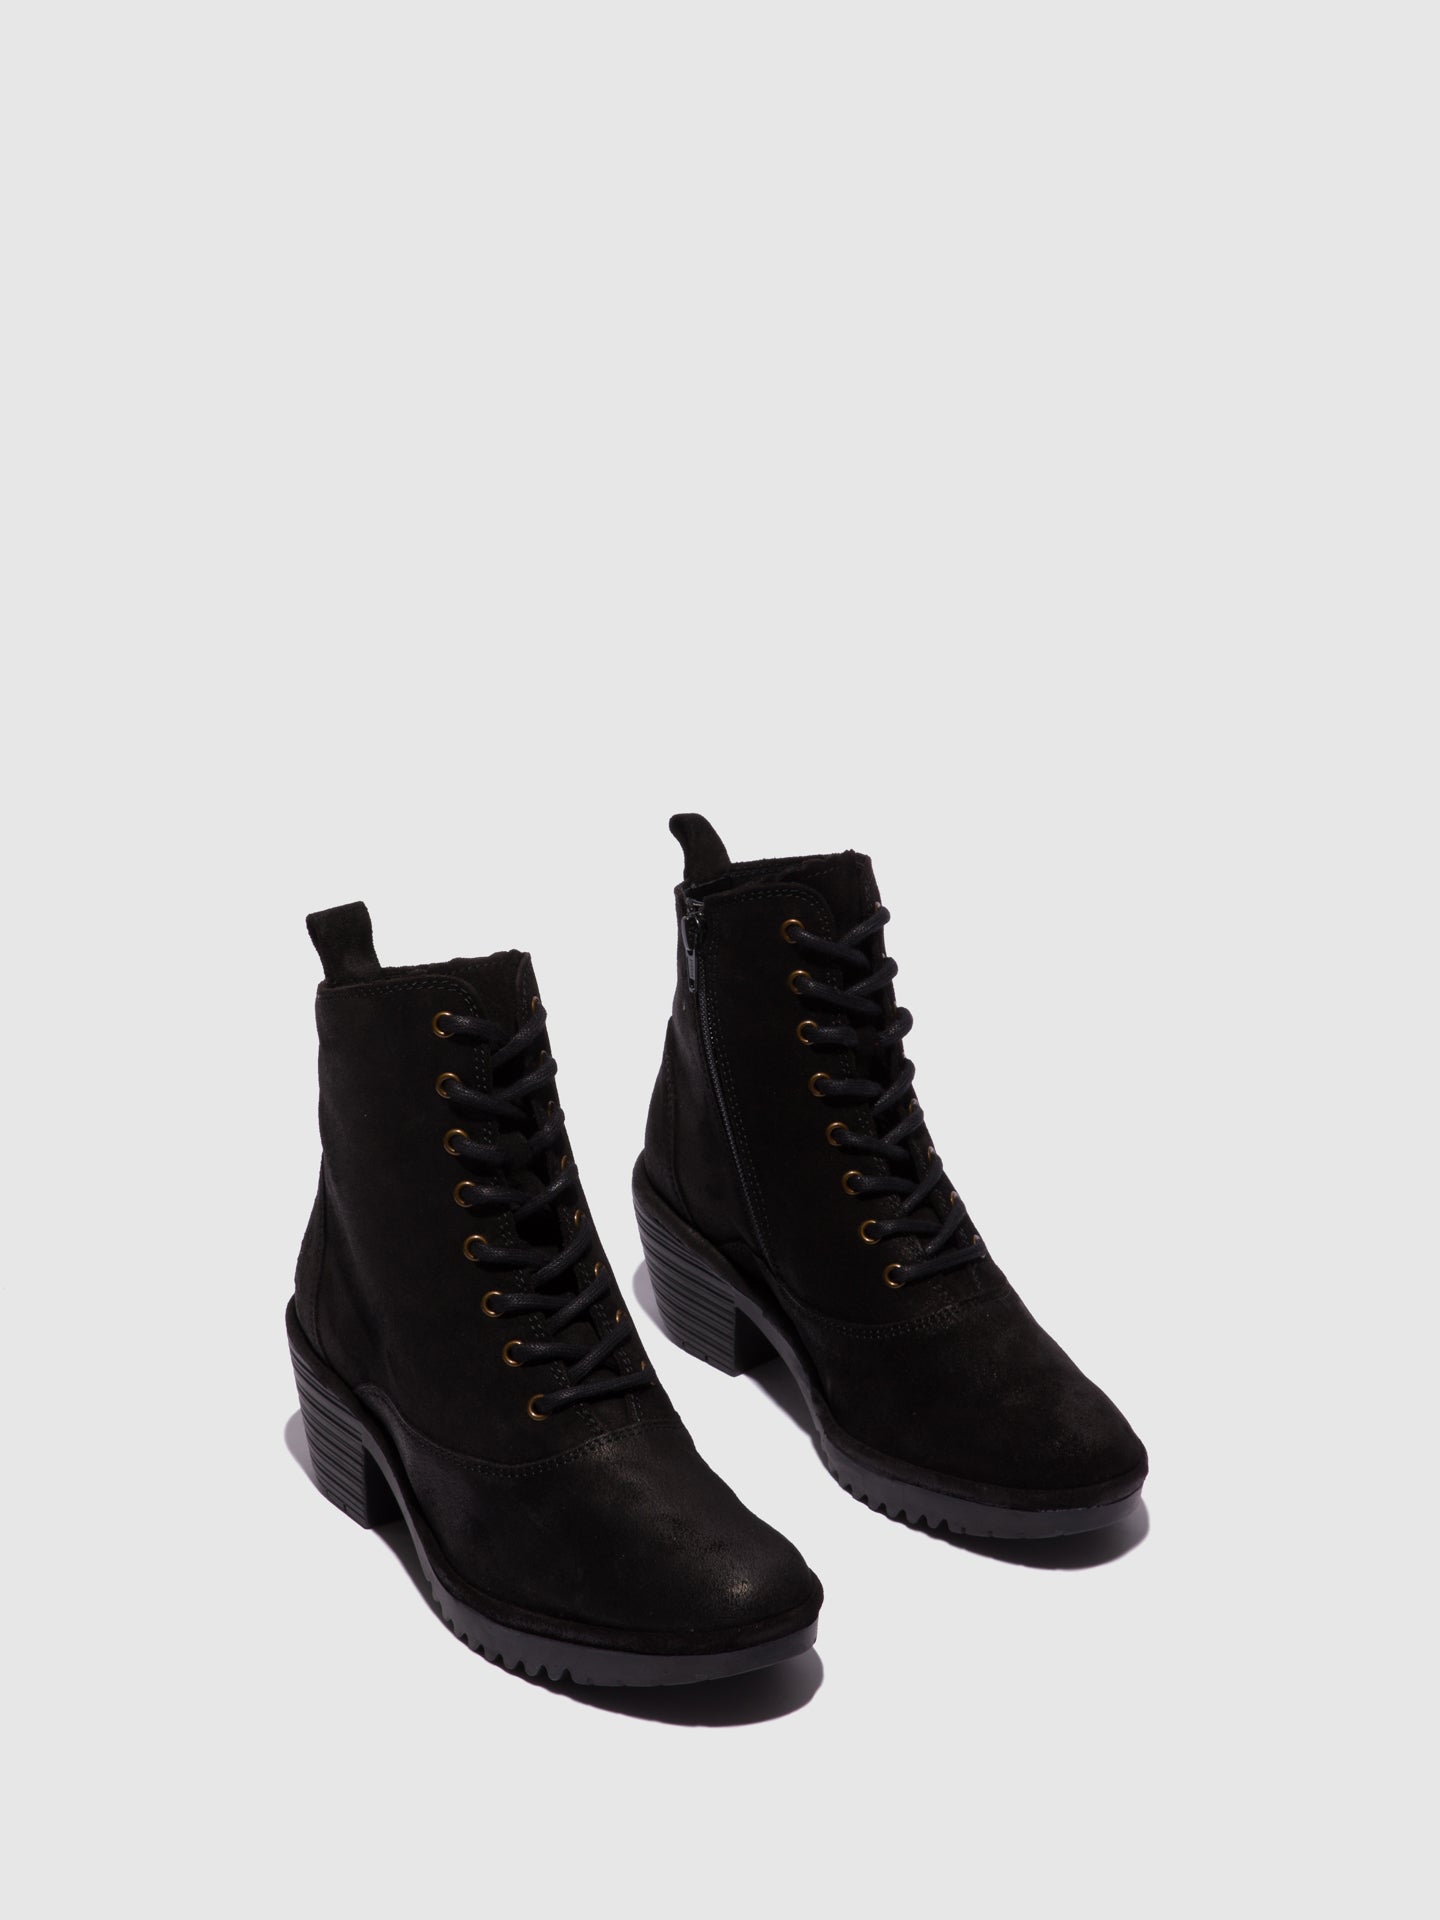 Fly London Black Lace-up Ankle Boots